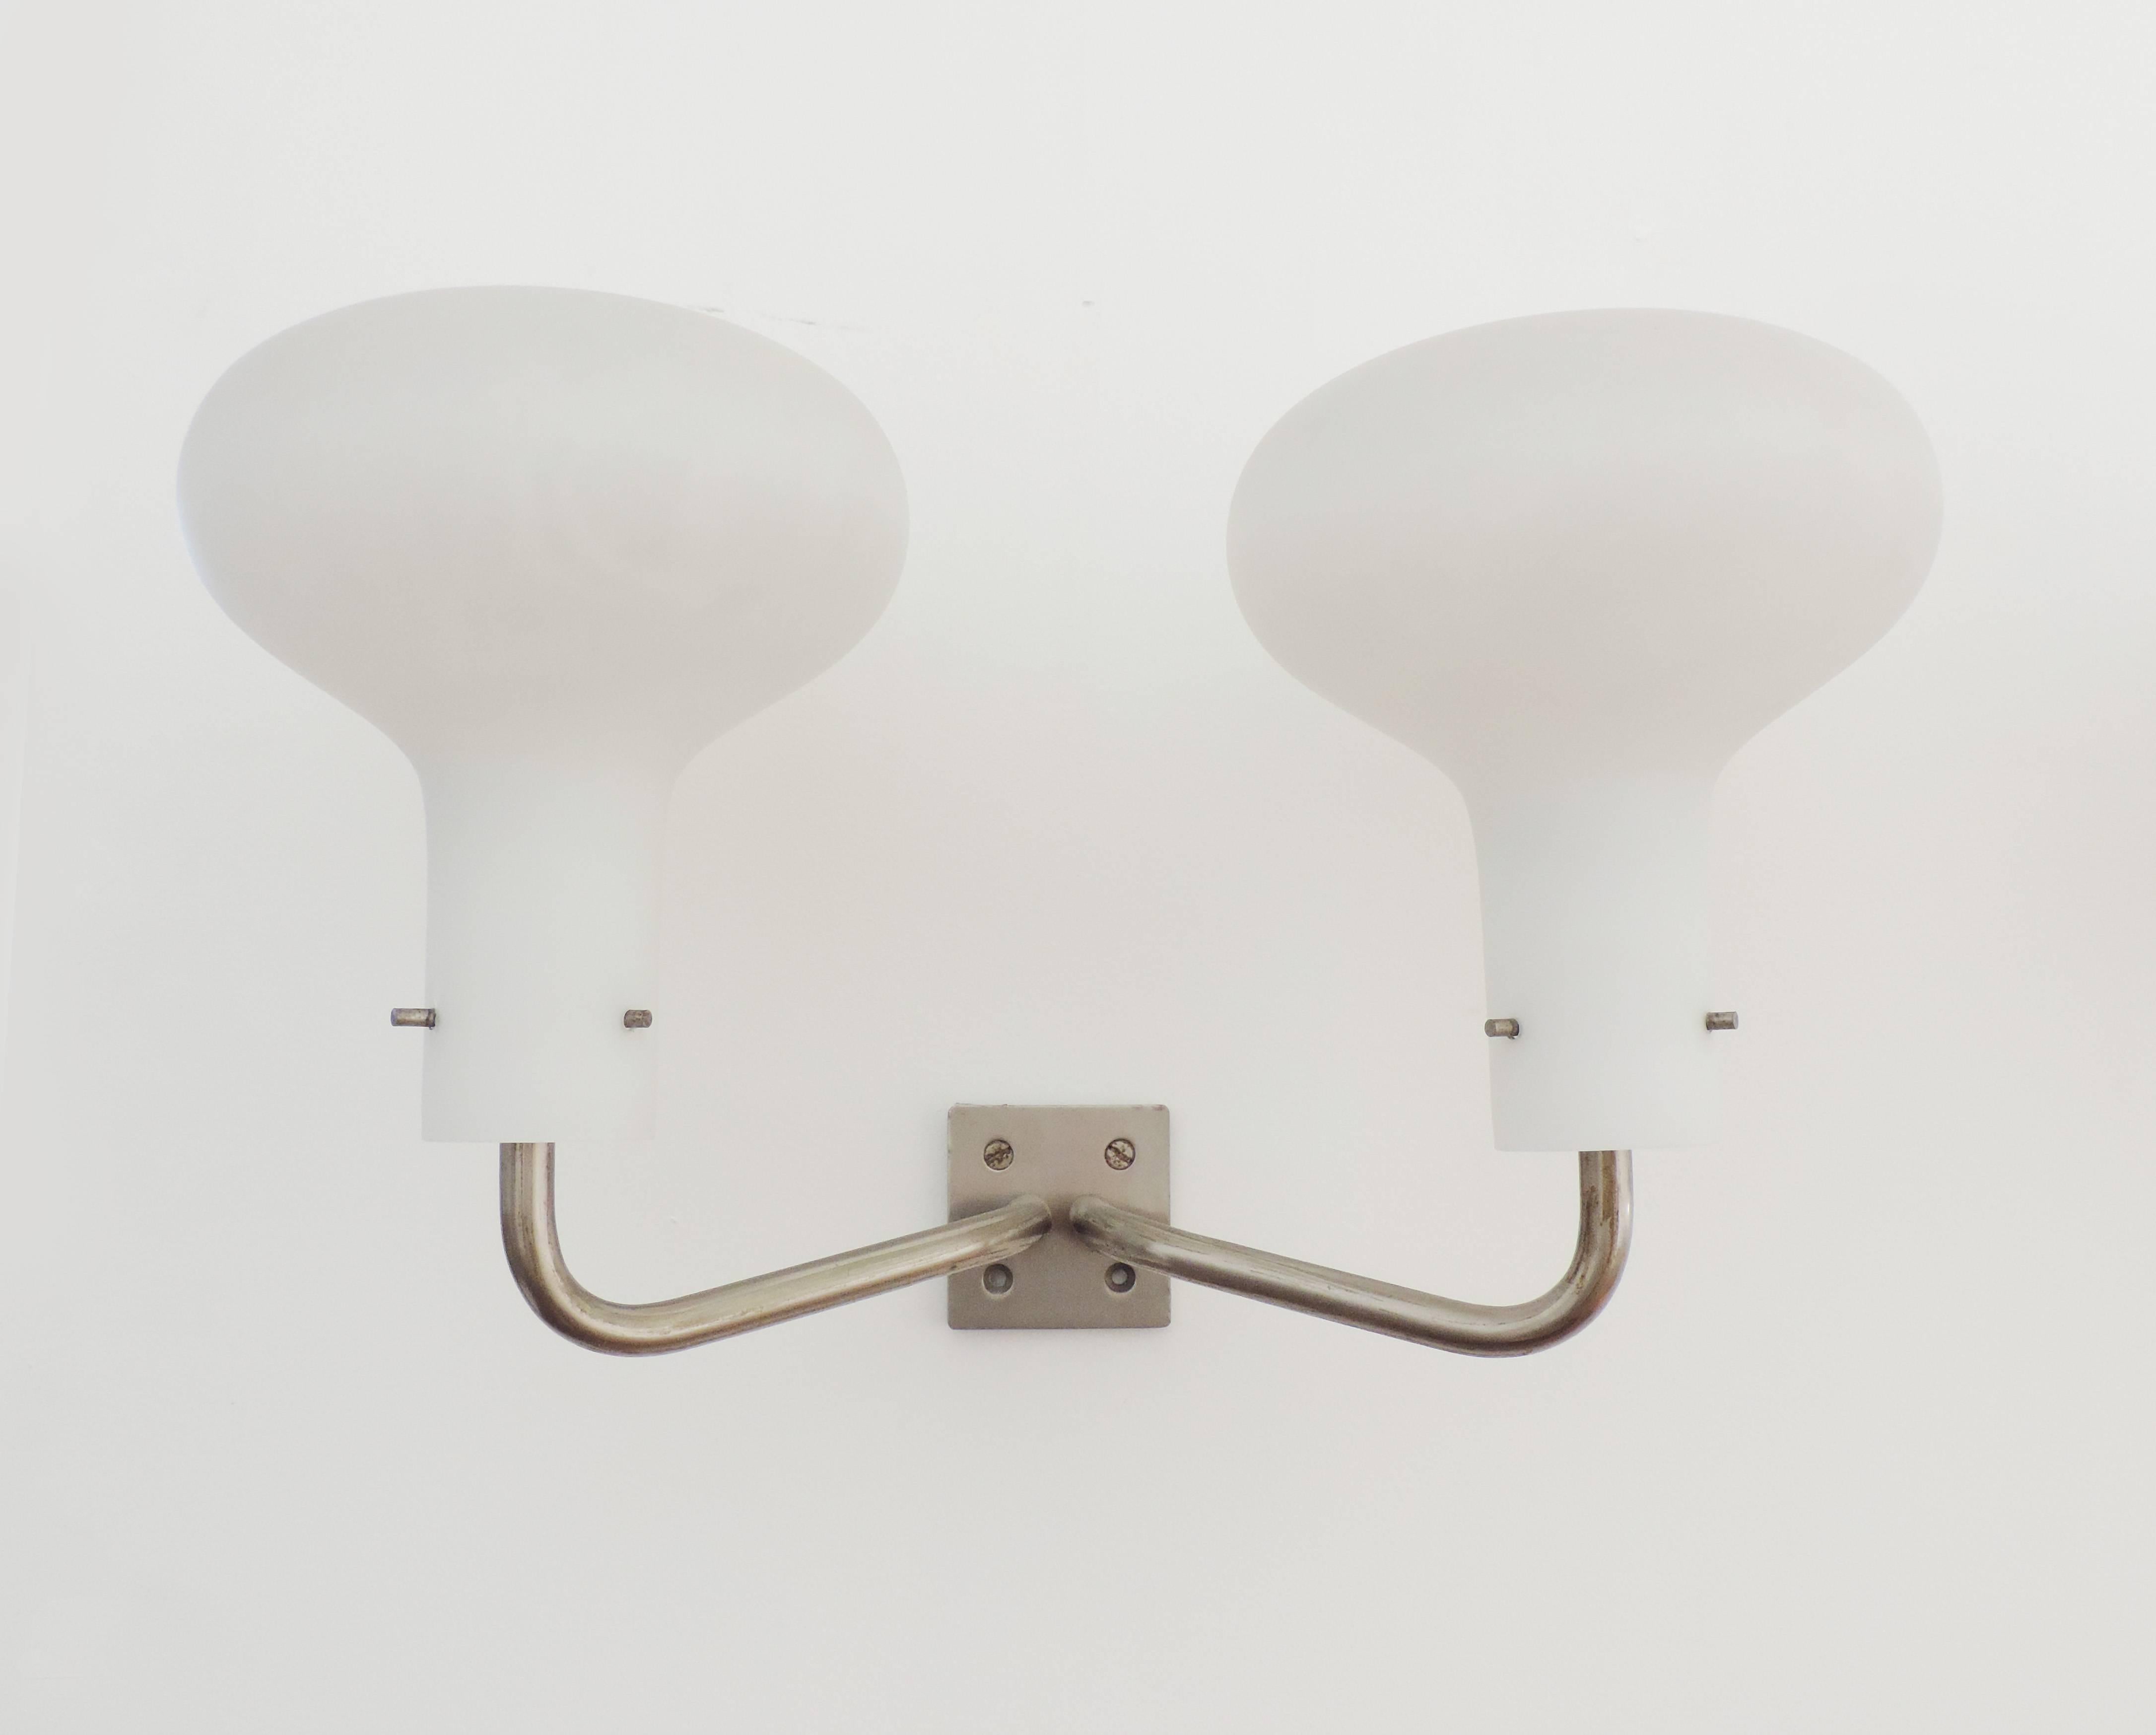 Pair of LP 12 sconces by Ignazio Gardella for Azucena.
Also referred to as Galleria sconces.